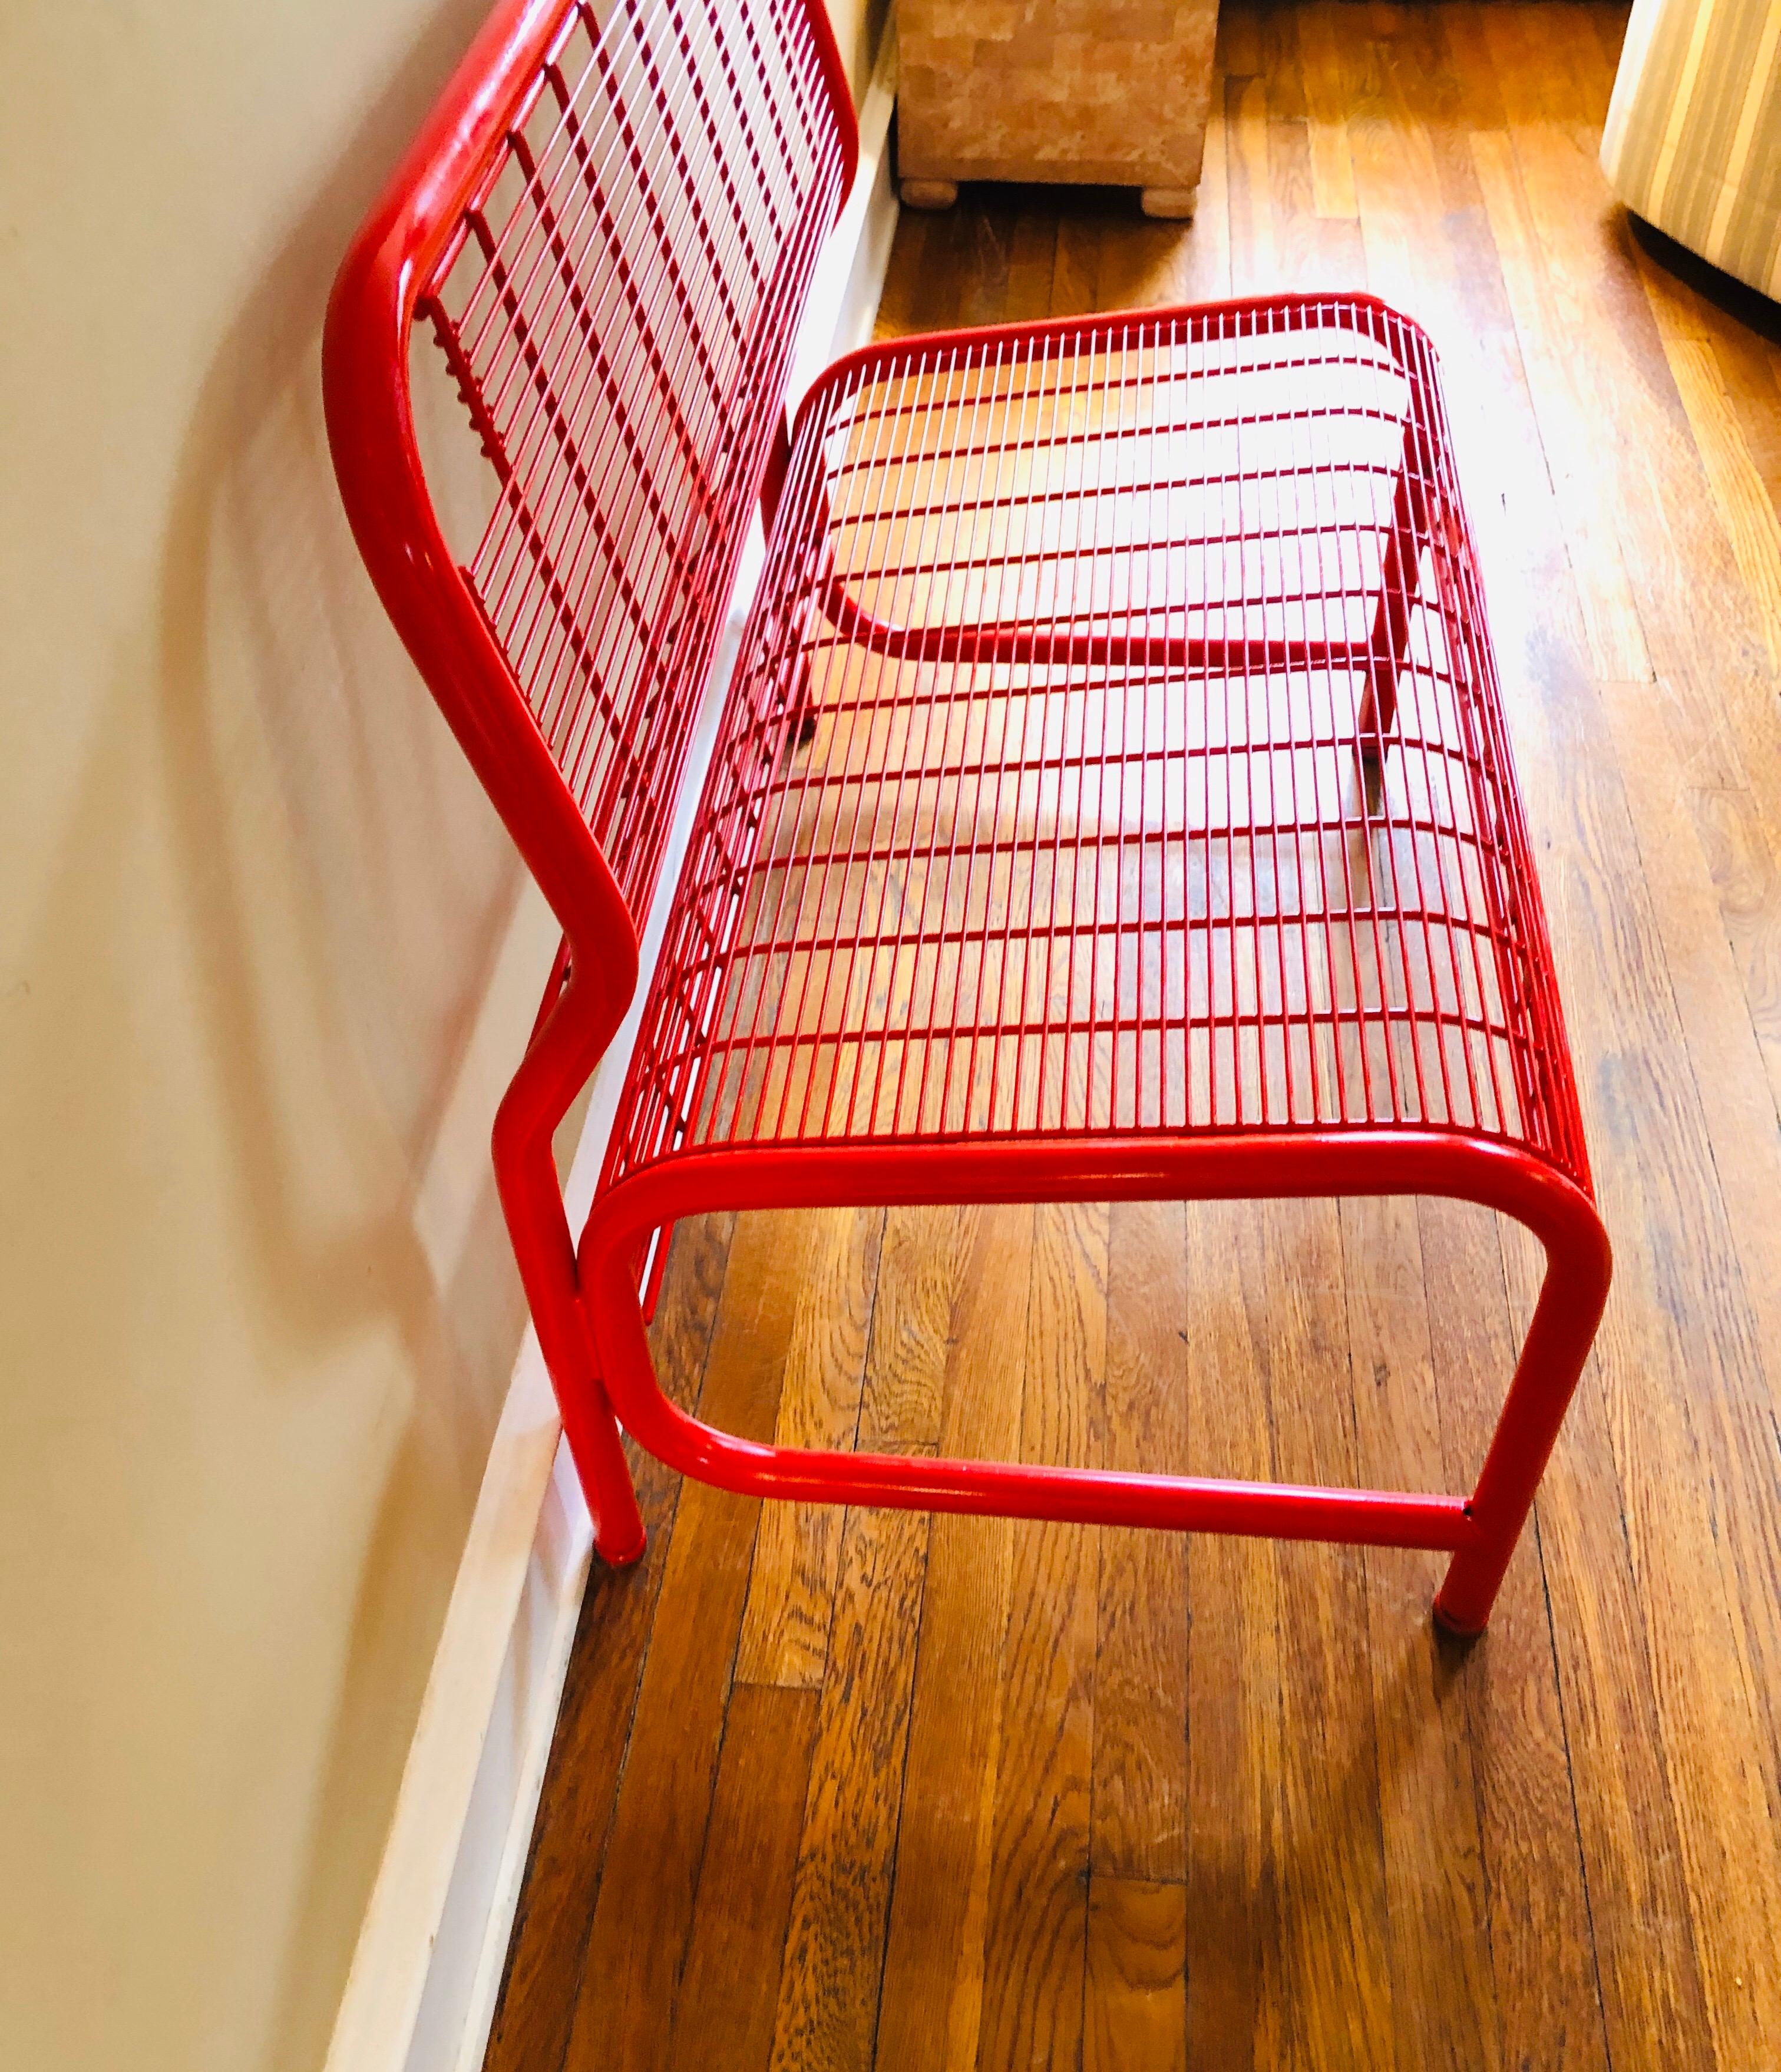 Fantastic pop of color in this Postmodern bench. Red high-gloss enamel freshly updated.